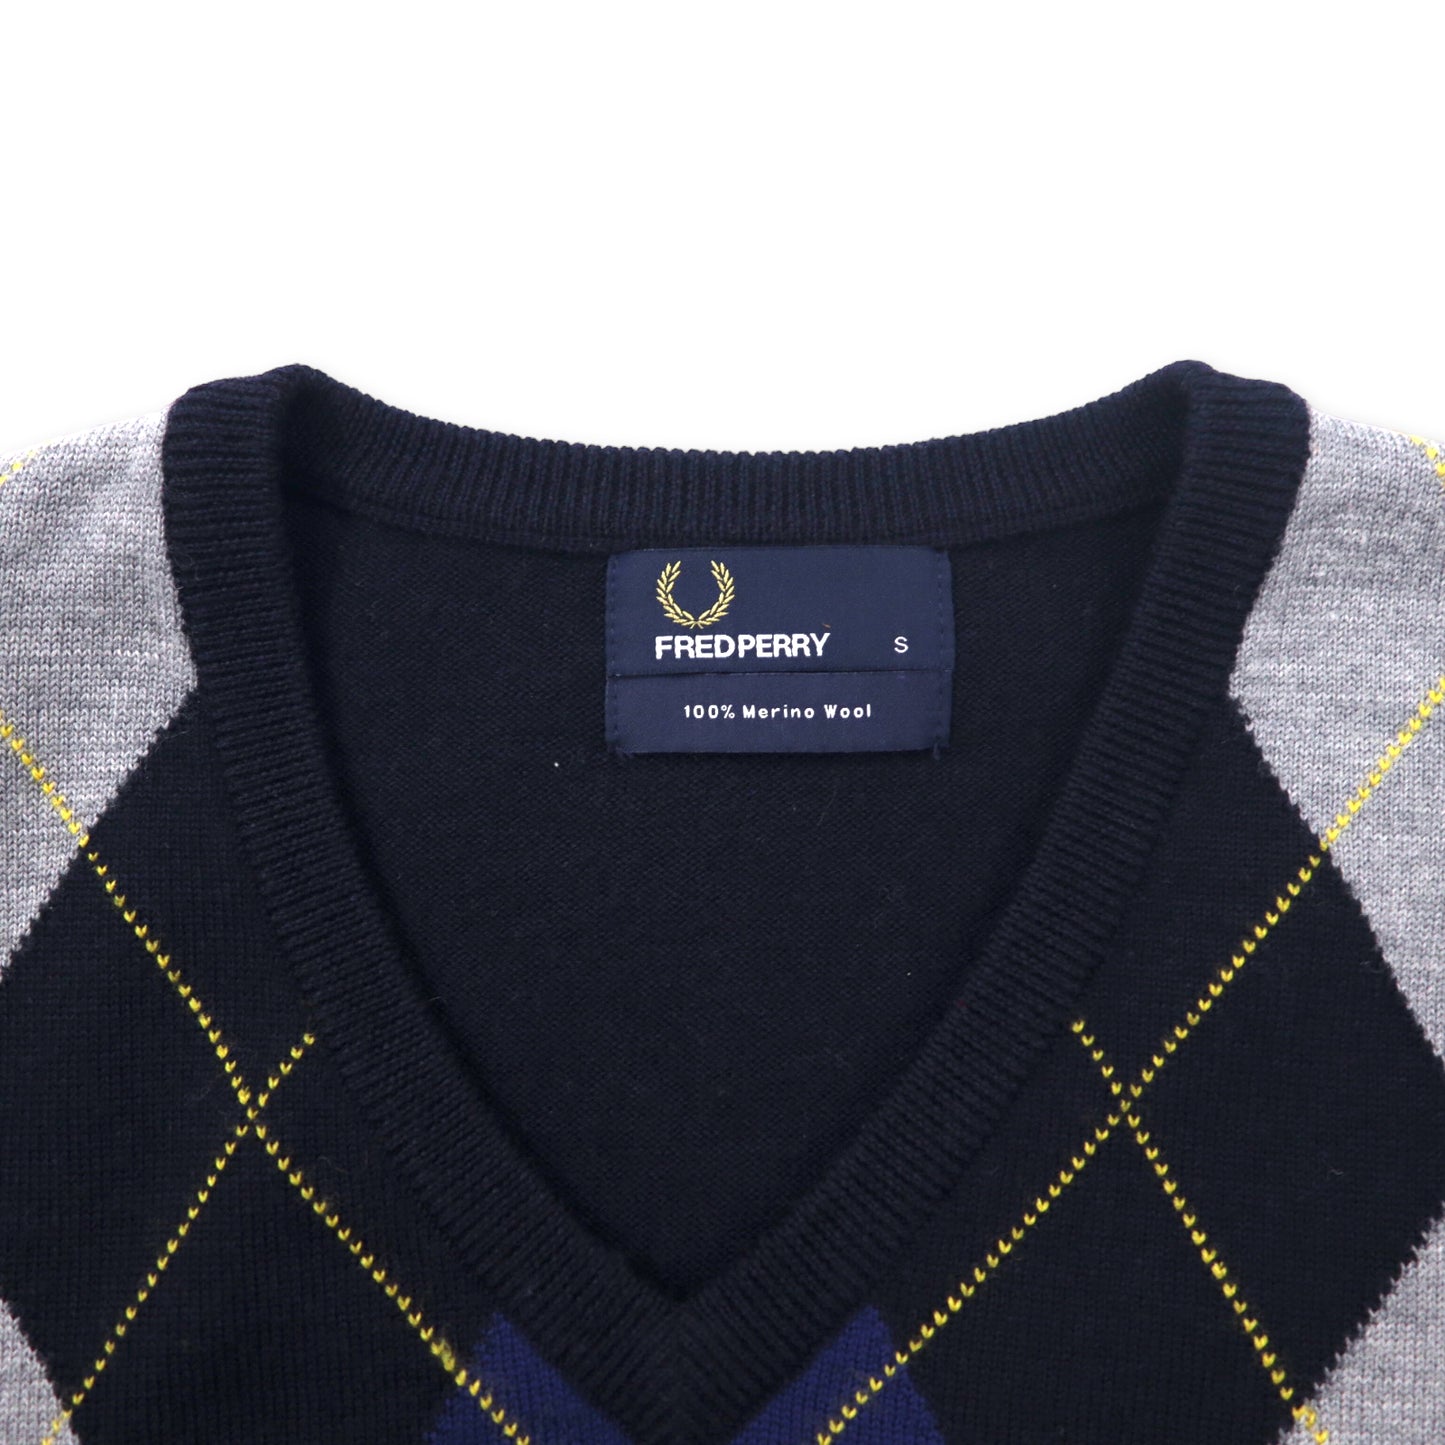 Fred Perry V Neck Argile Knit Sweater S Navy Merino Wool One Point 